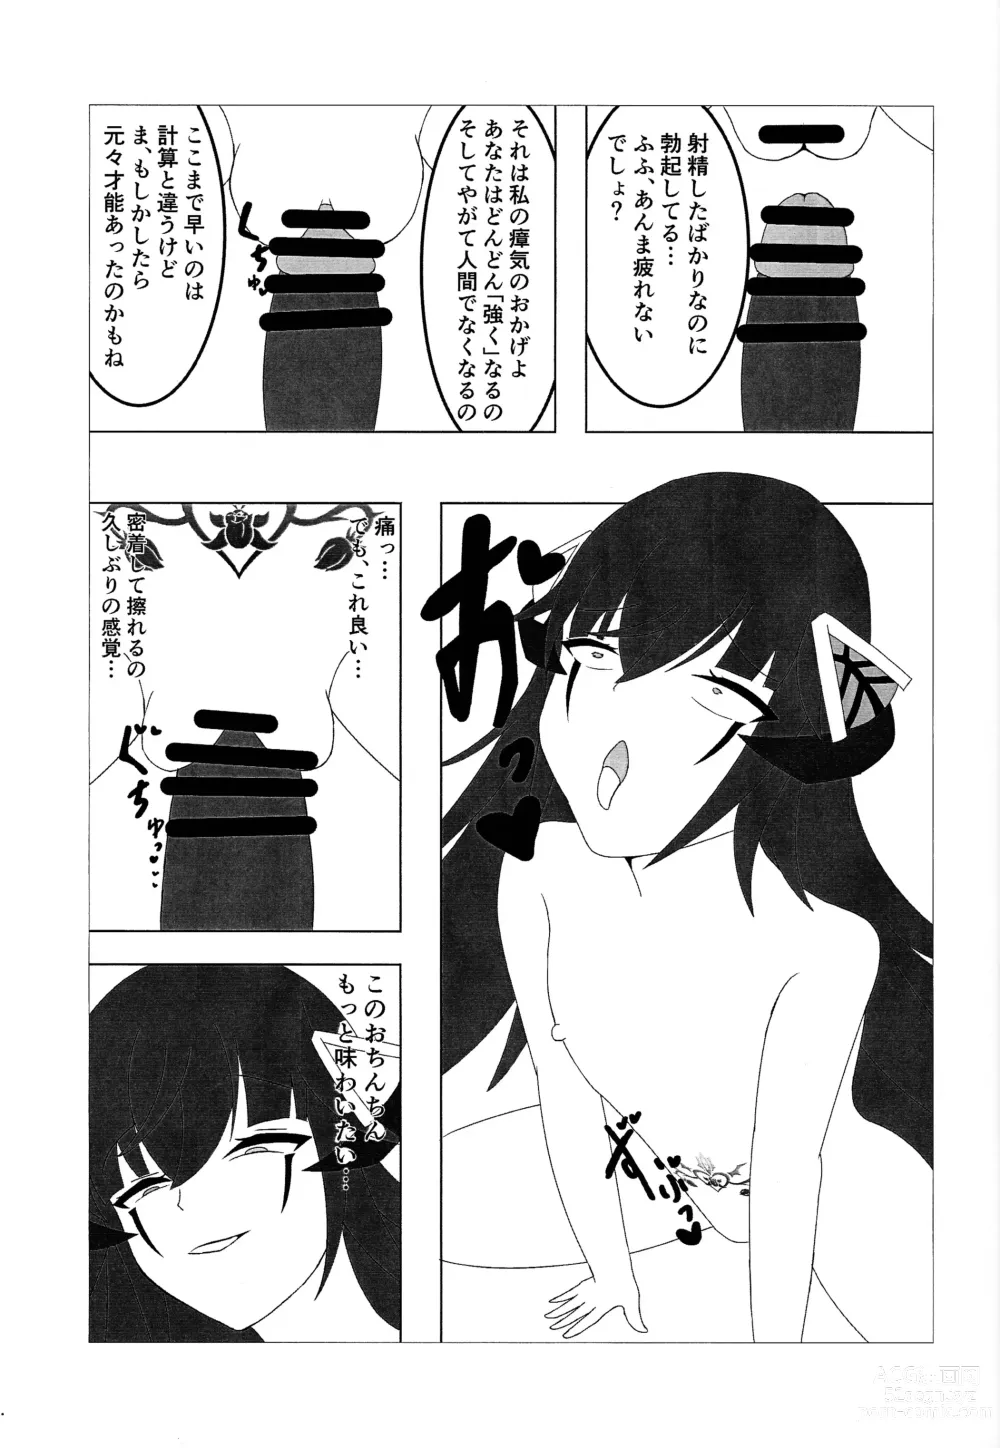 Page 14 of doujinshi FLAMES OF THIS AFFECTION